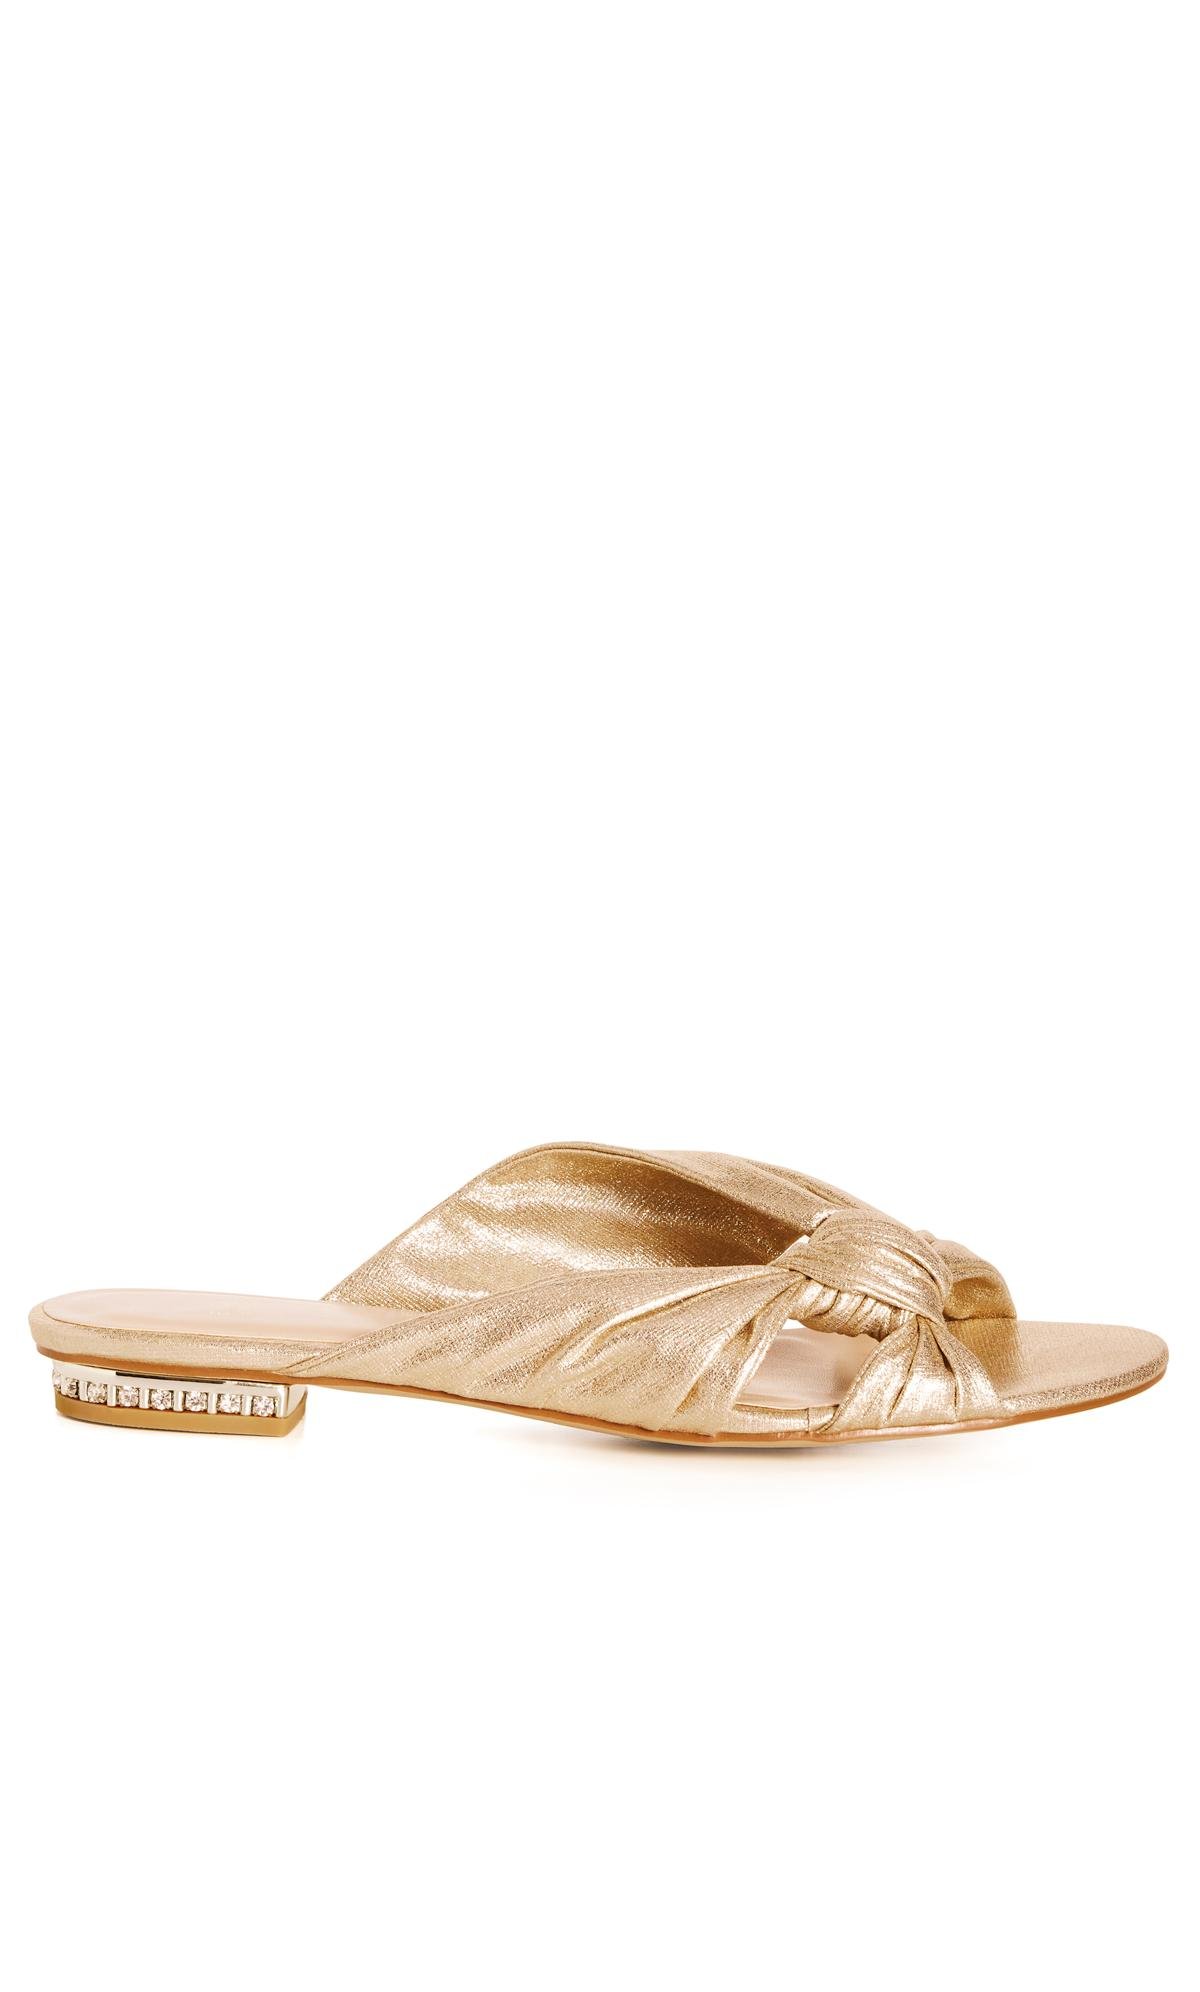 Evans Gold Knotted Sandals 1